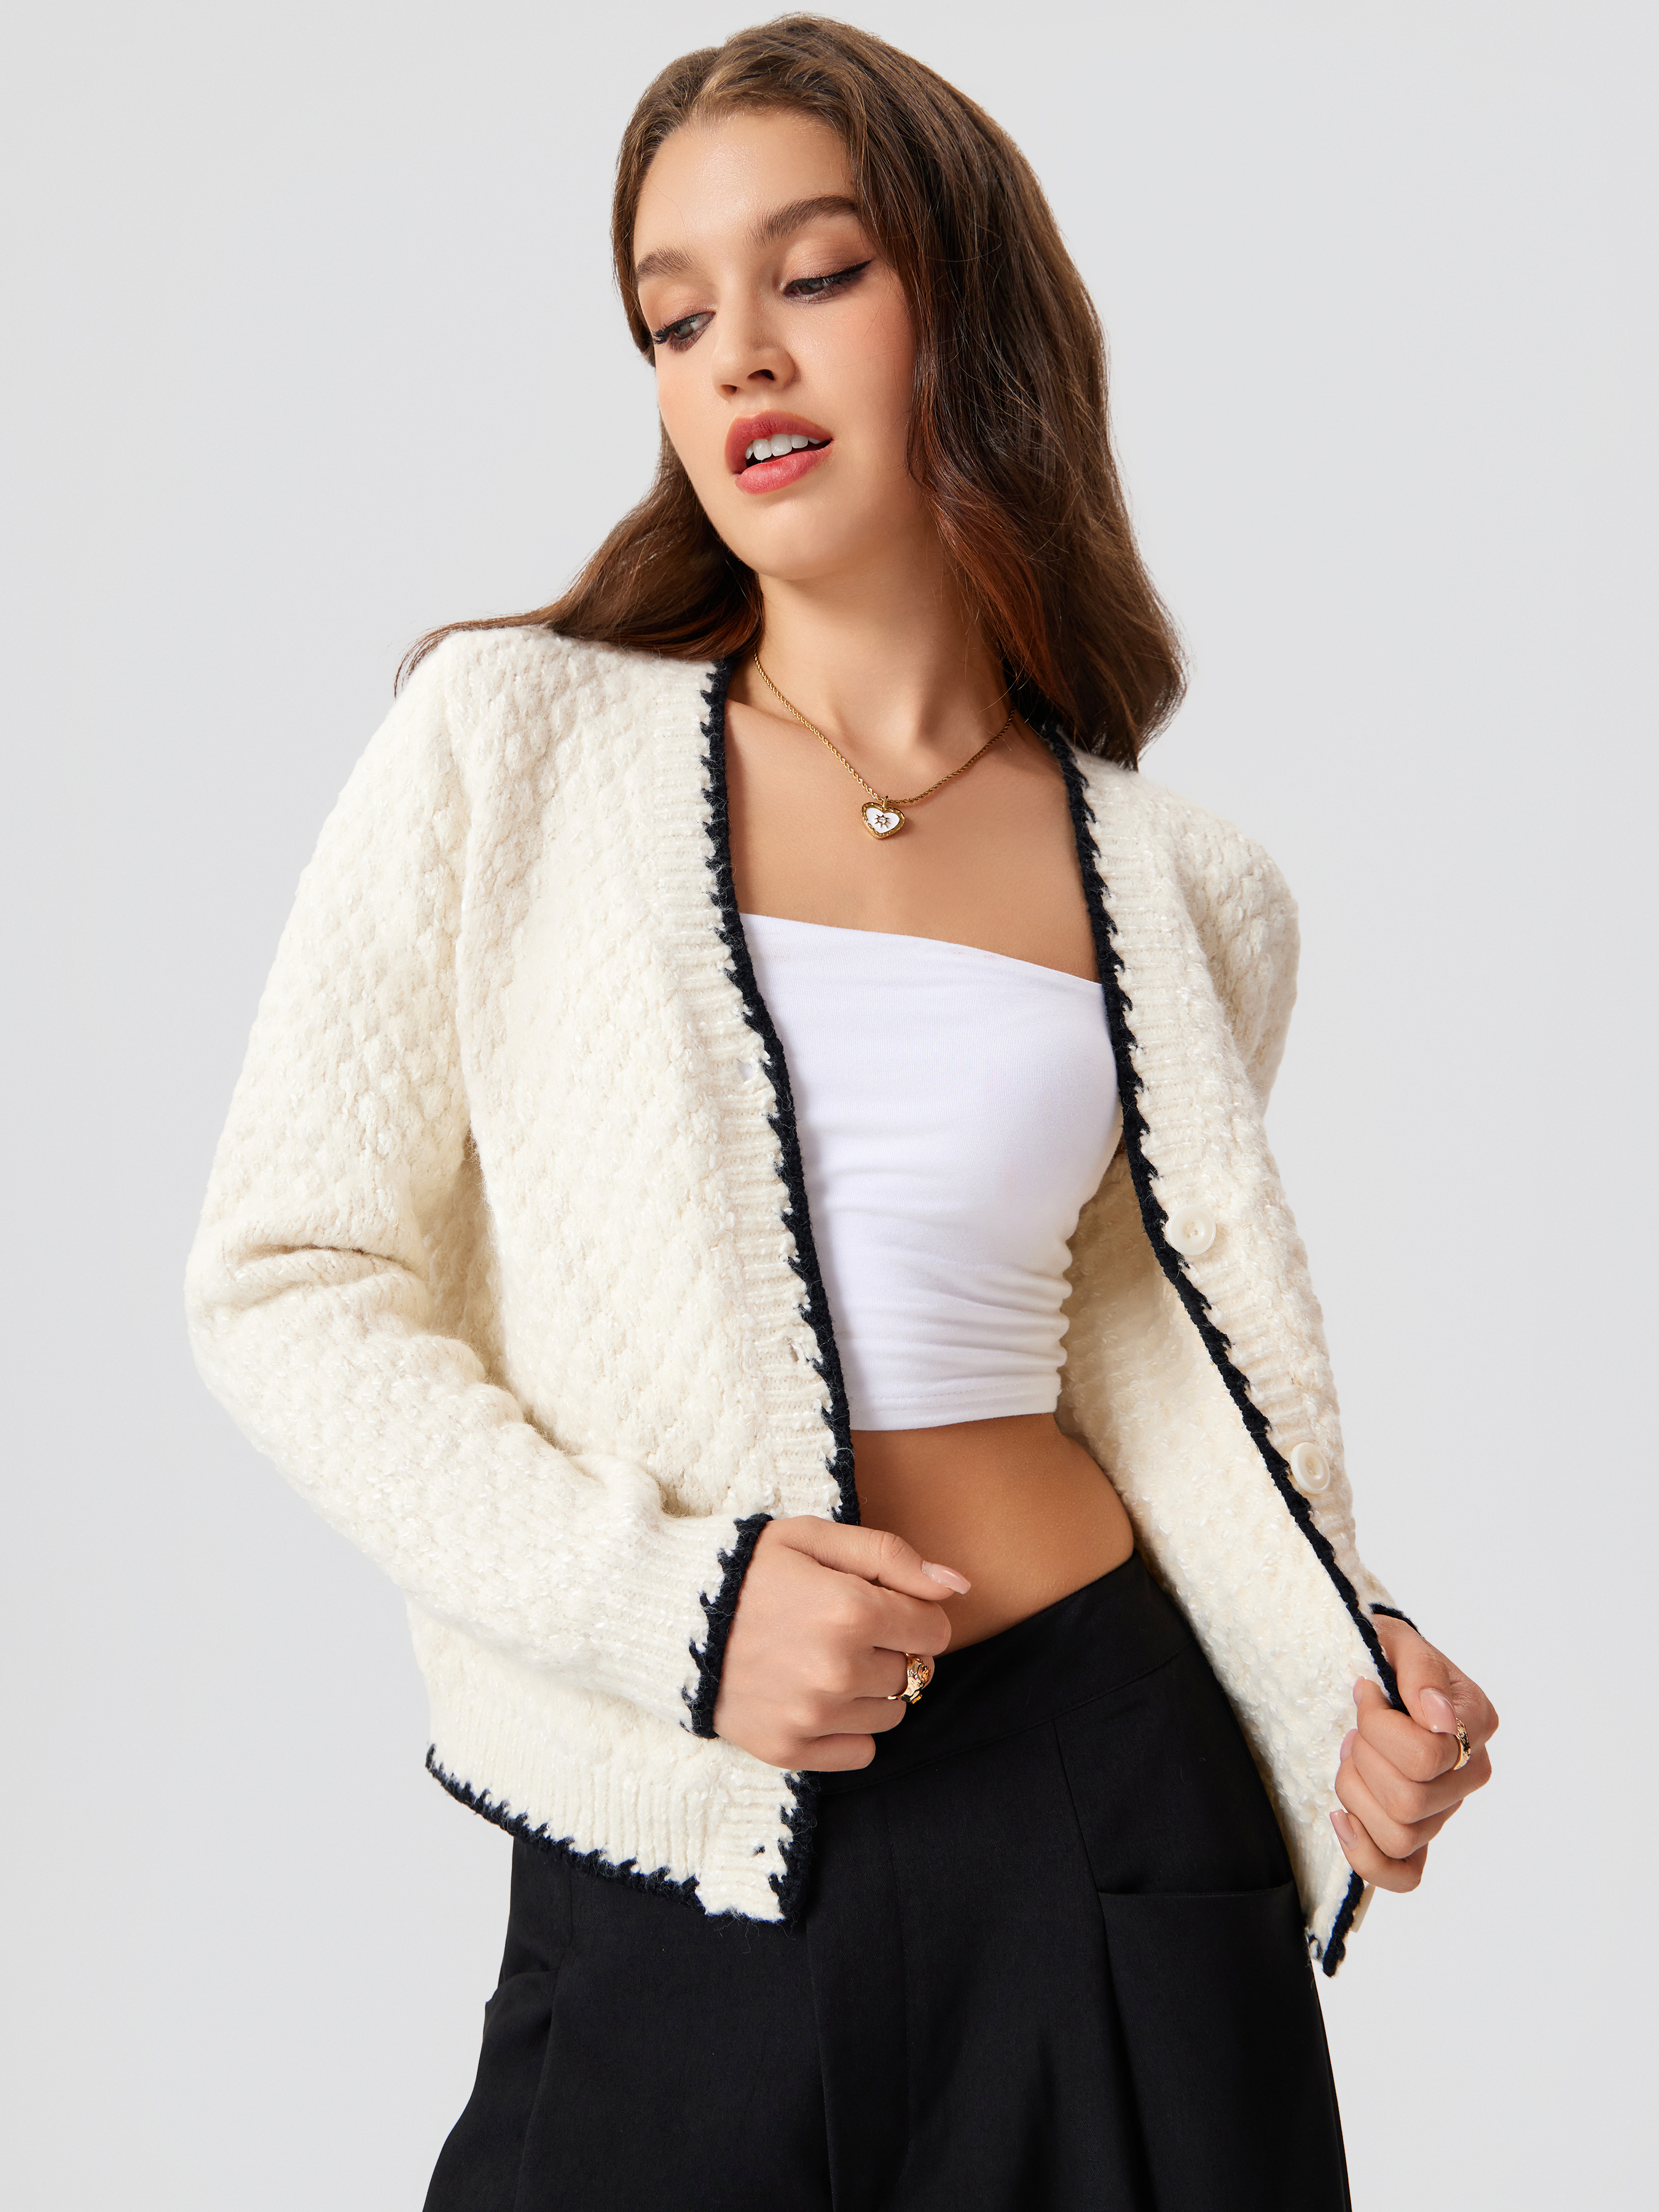 Women's Cardigans & Sweaters - Cider